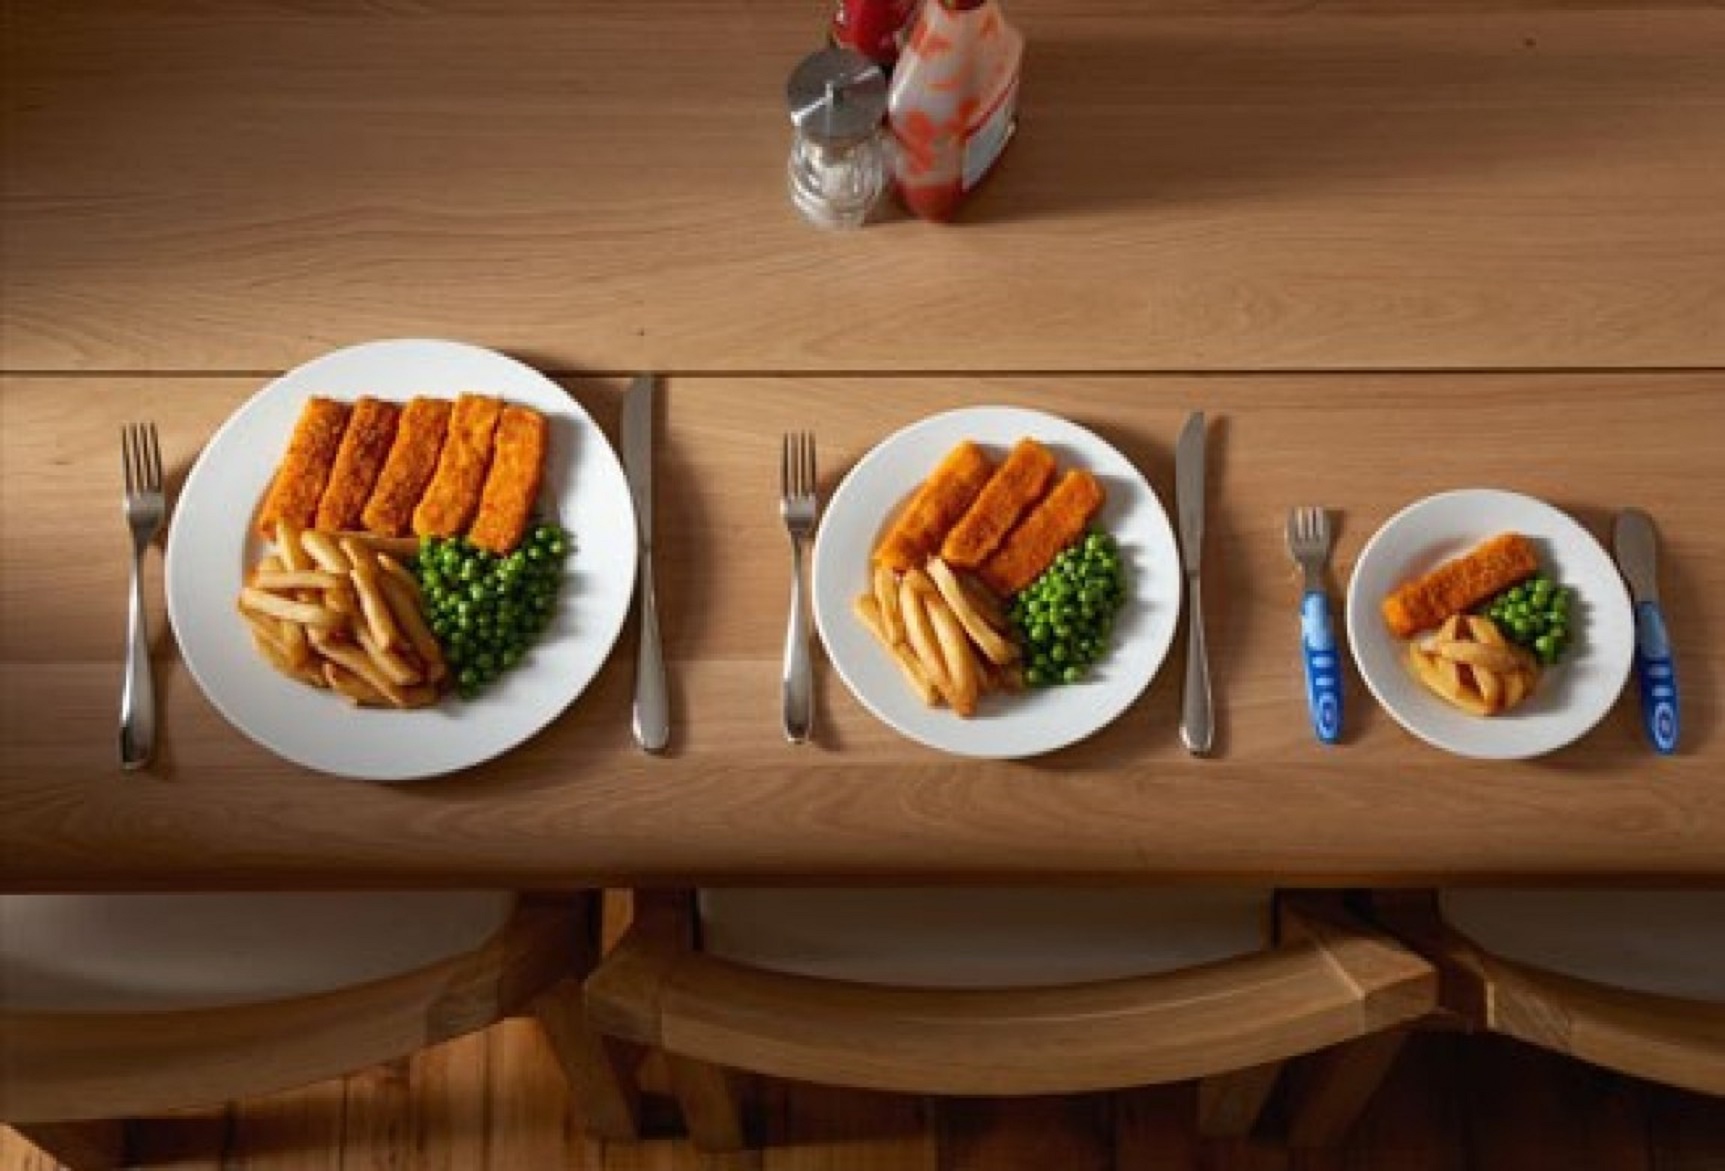 A surprising discovery about fast food portion sizes | Lunatic ...